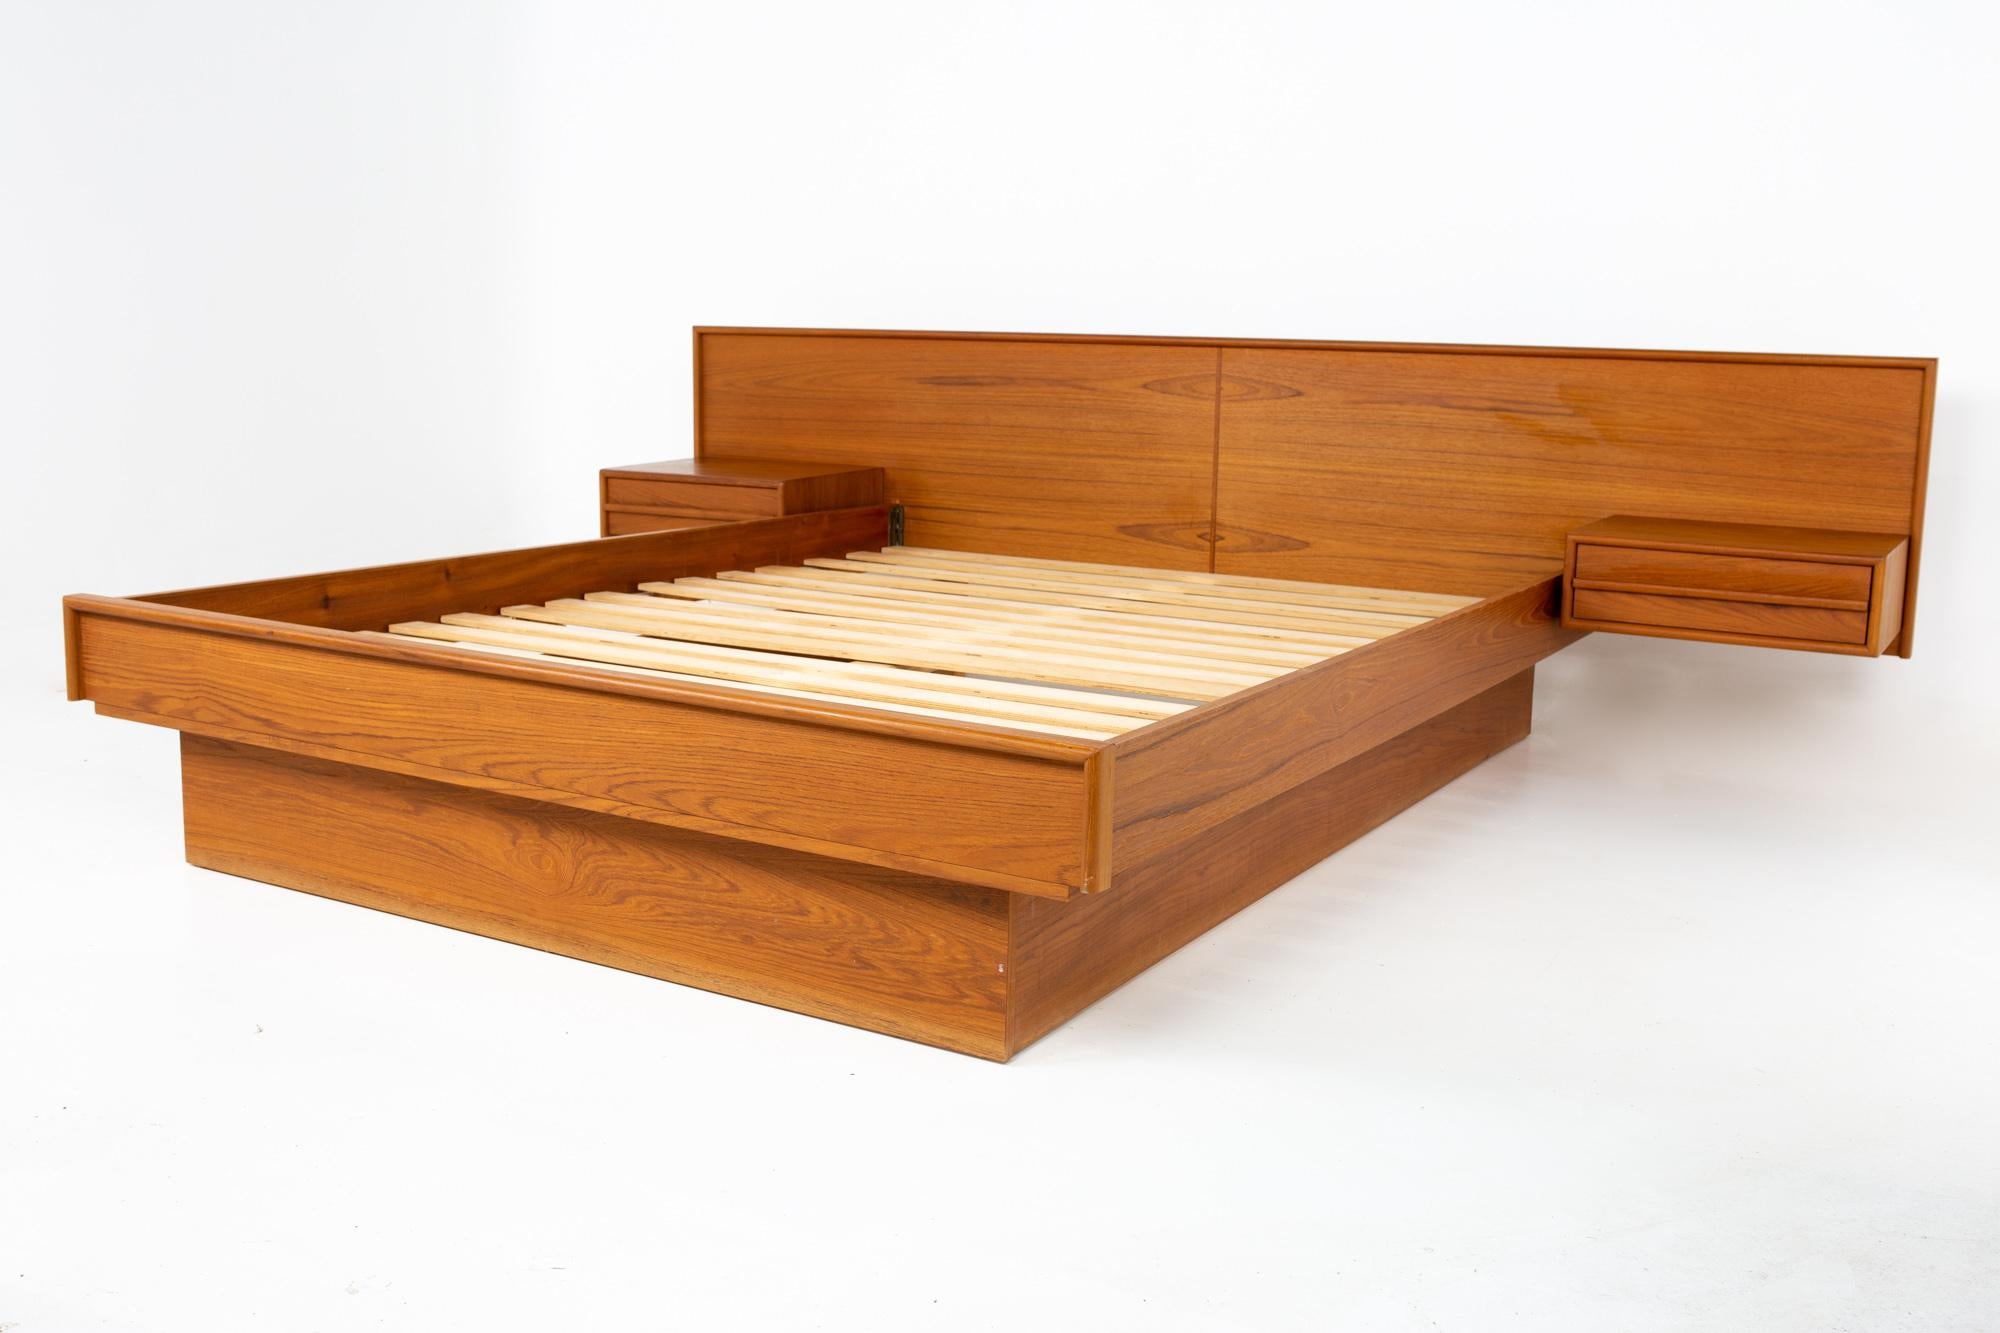 Mid century Danish teak queen floating nightstand platform bed
Platform bed measures: 104.75 wide x 82.75 deep x 29.25 inches high

All pieces of furniture can be had in what we call restored vintage condition. That means the piece is restored